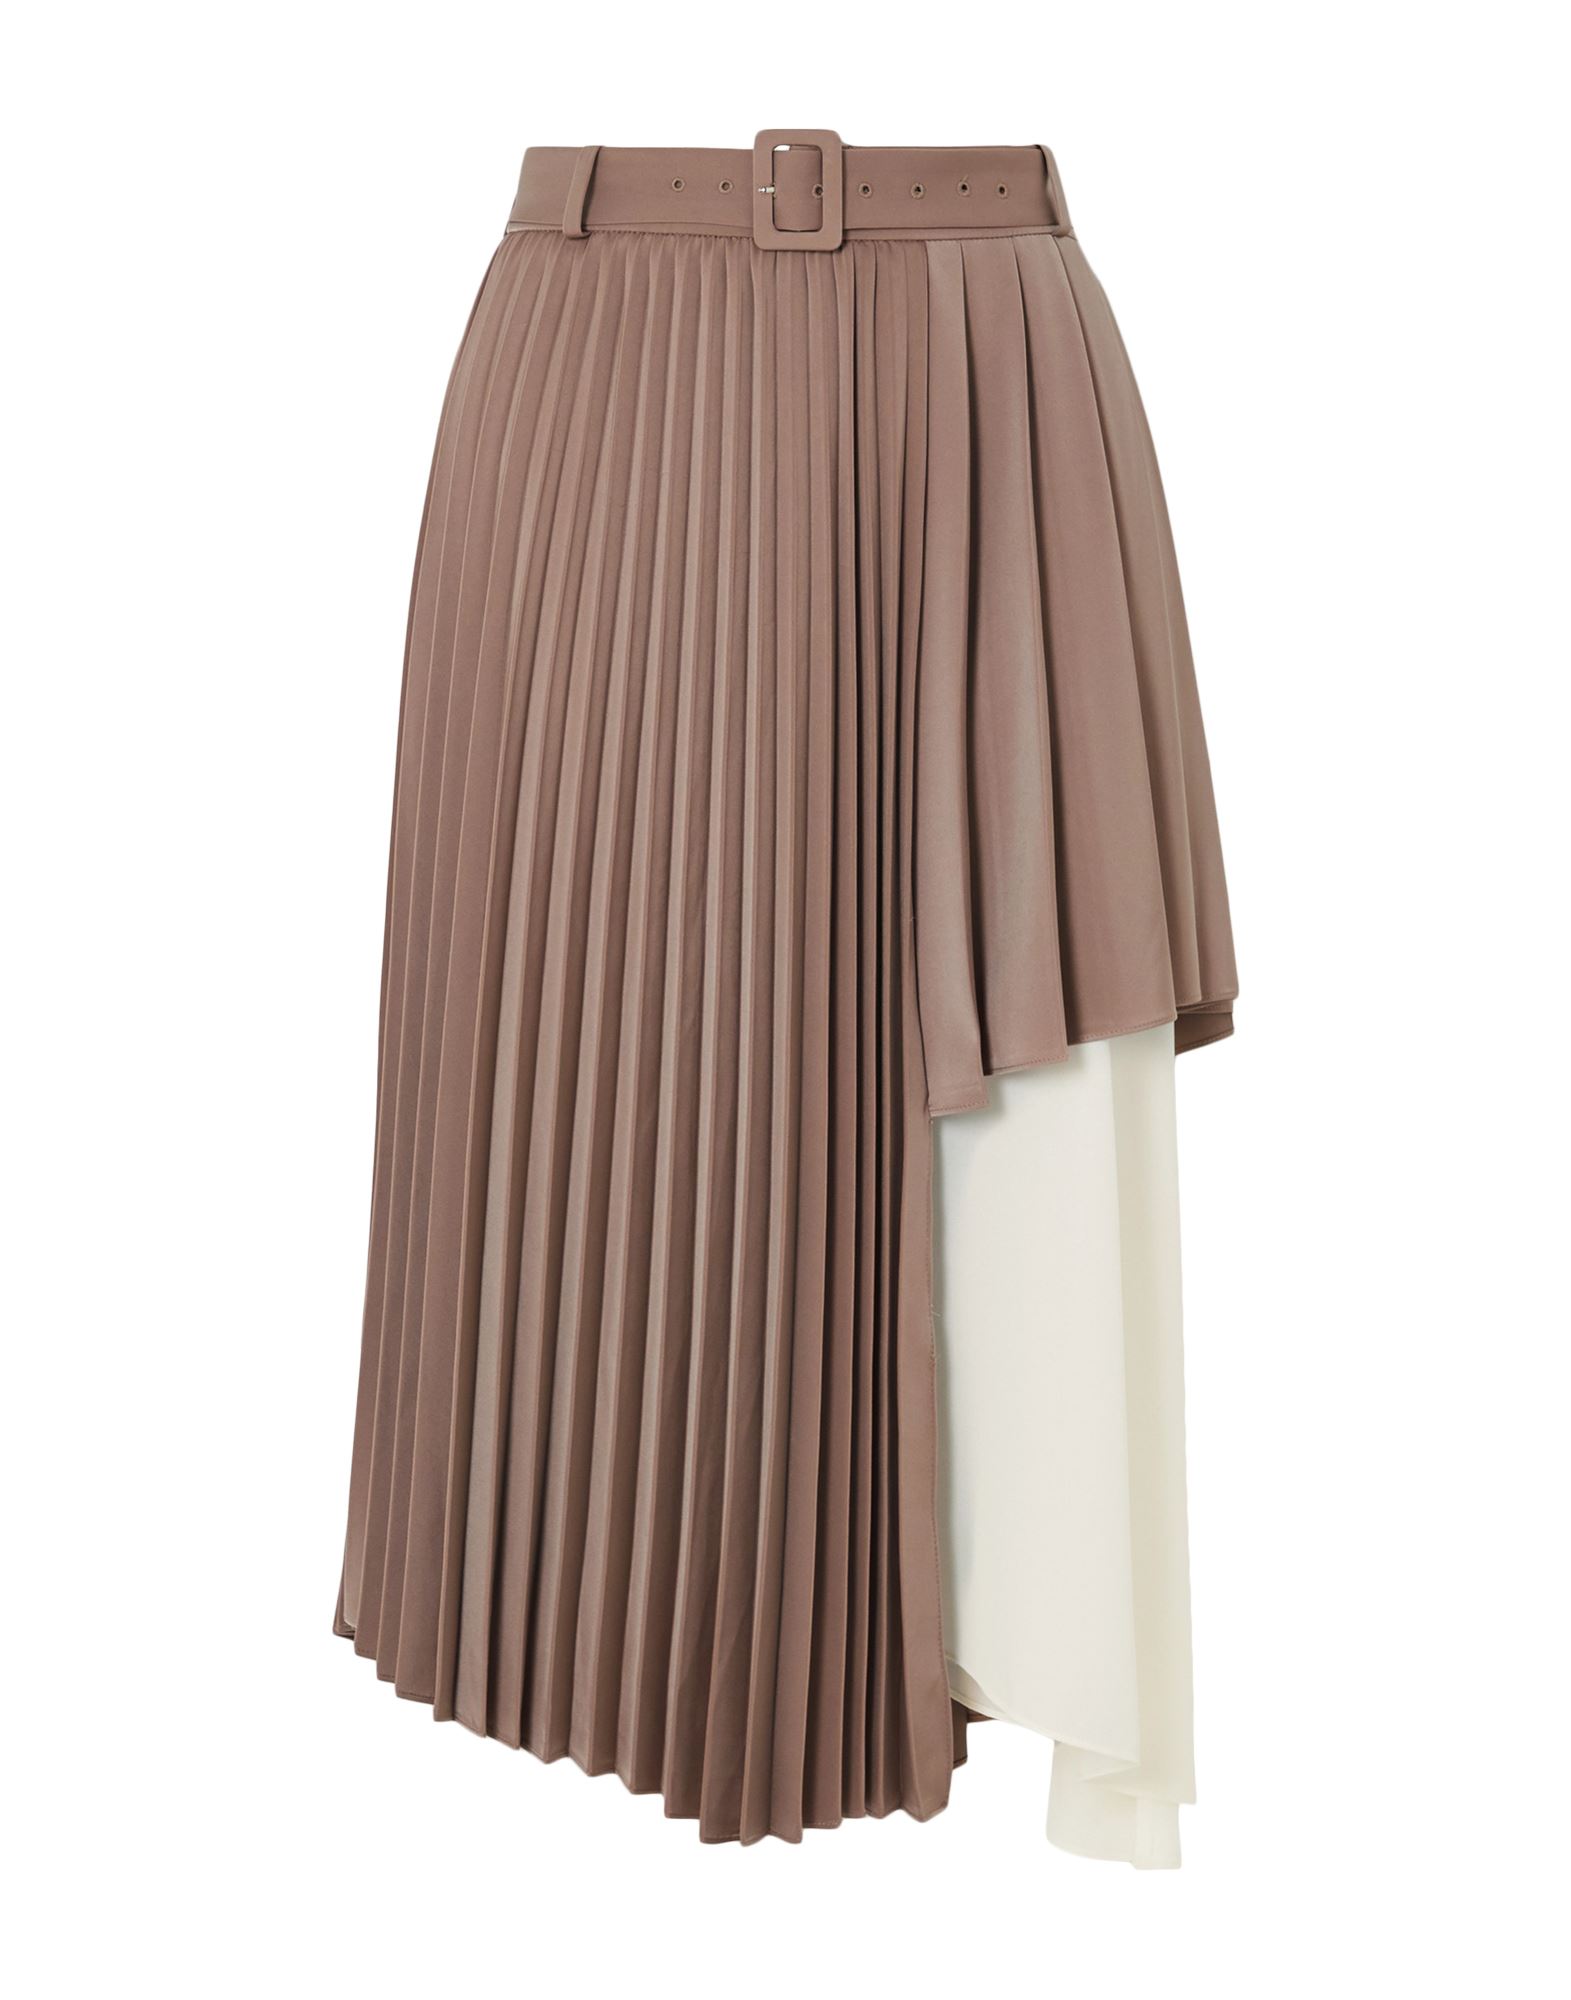 ANDERSSON BELL Skirts | ModeSens